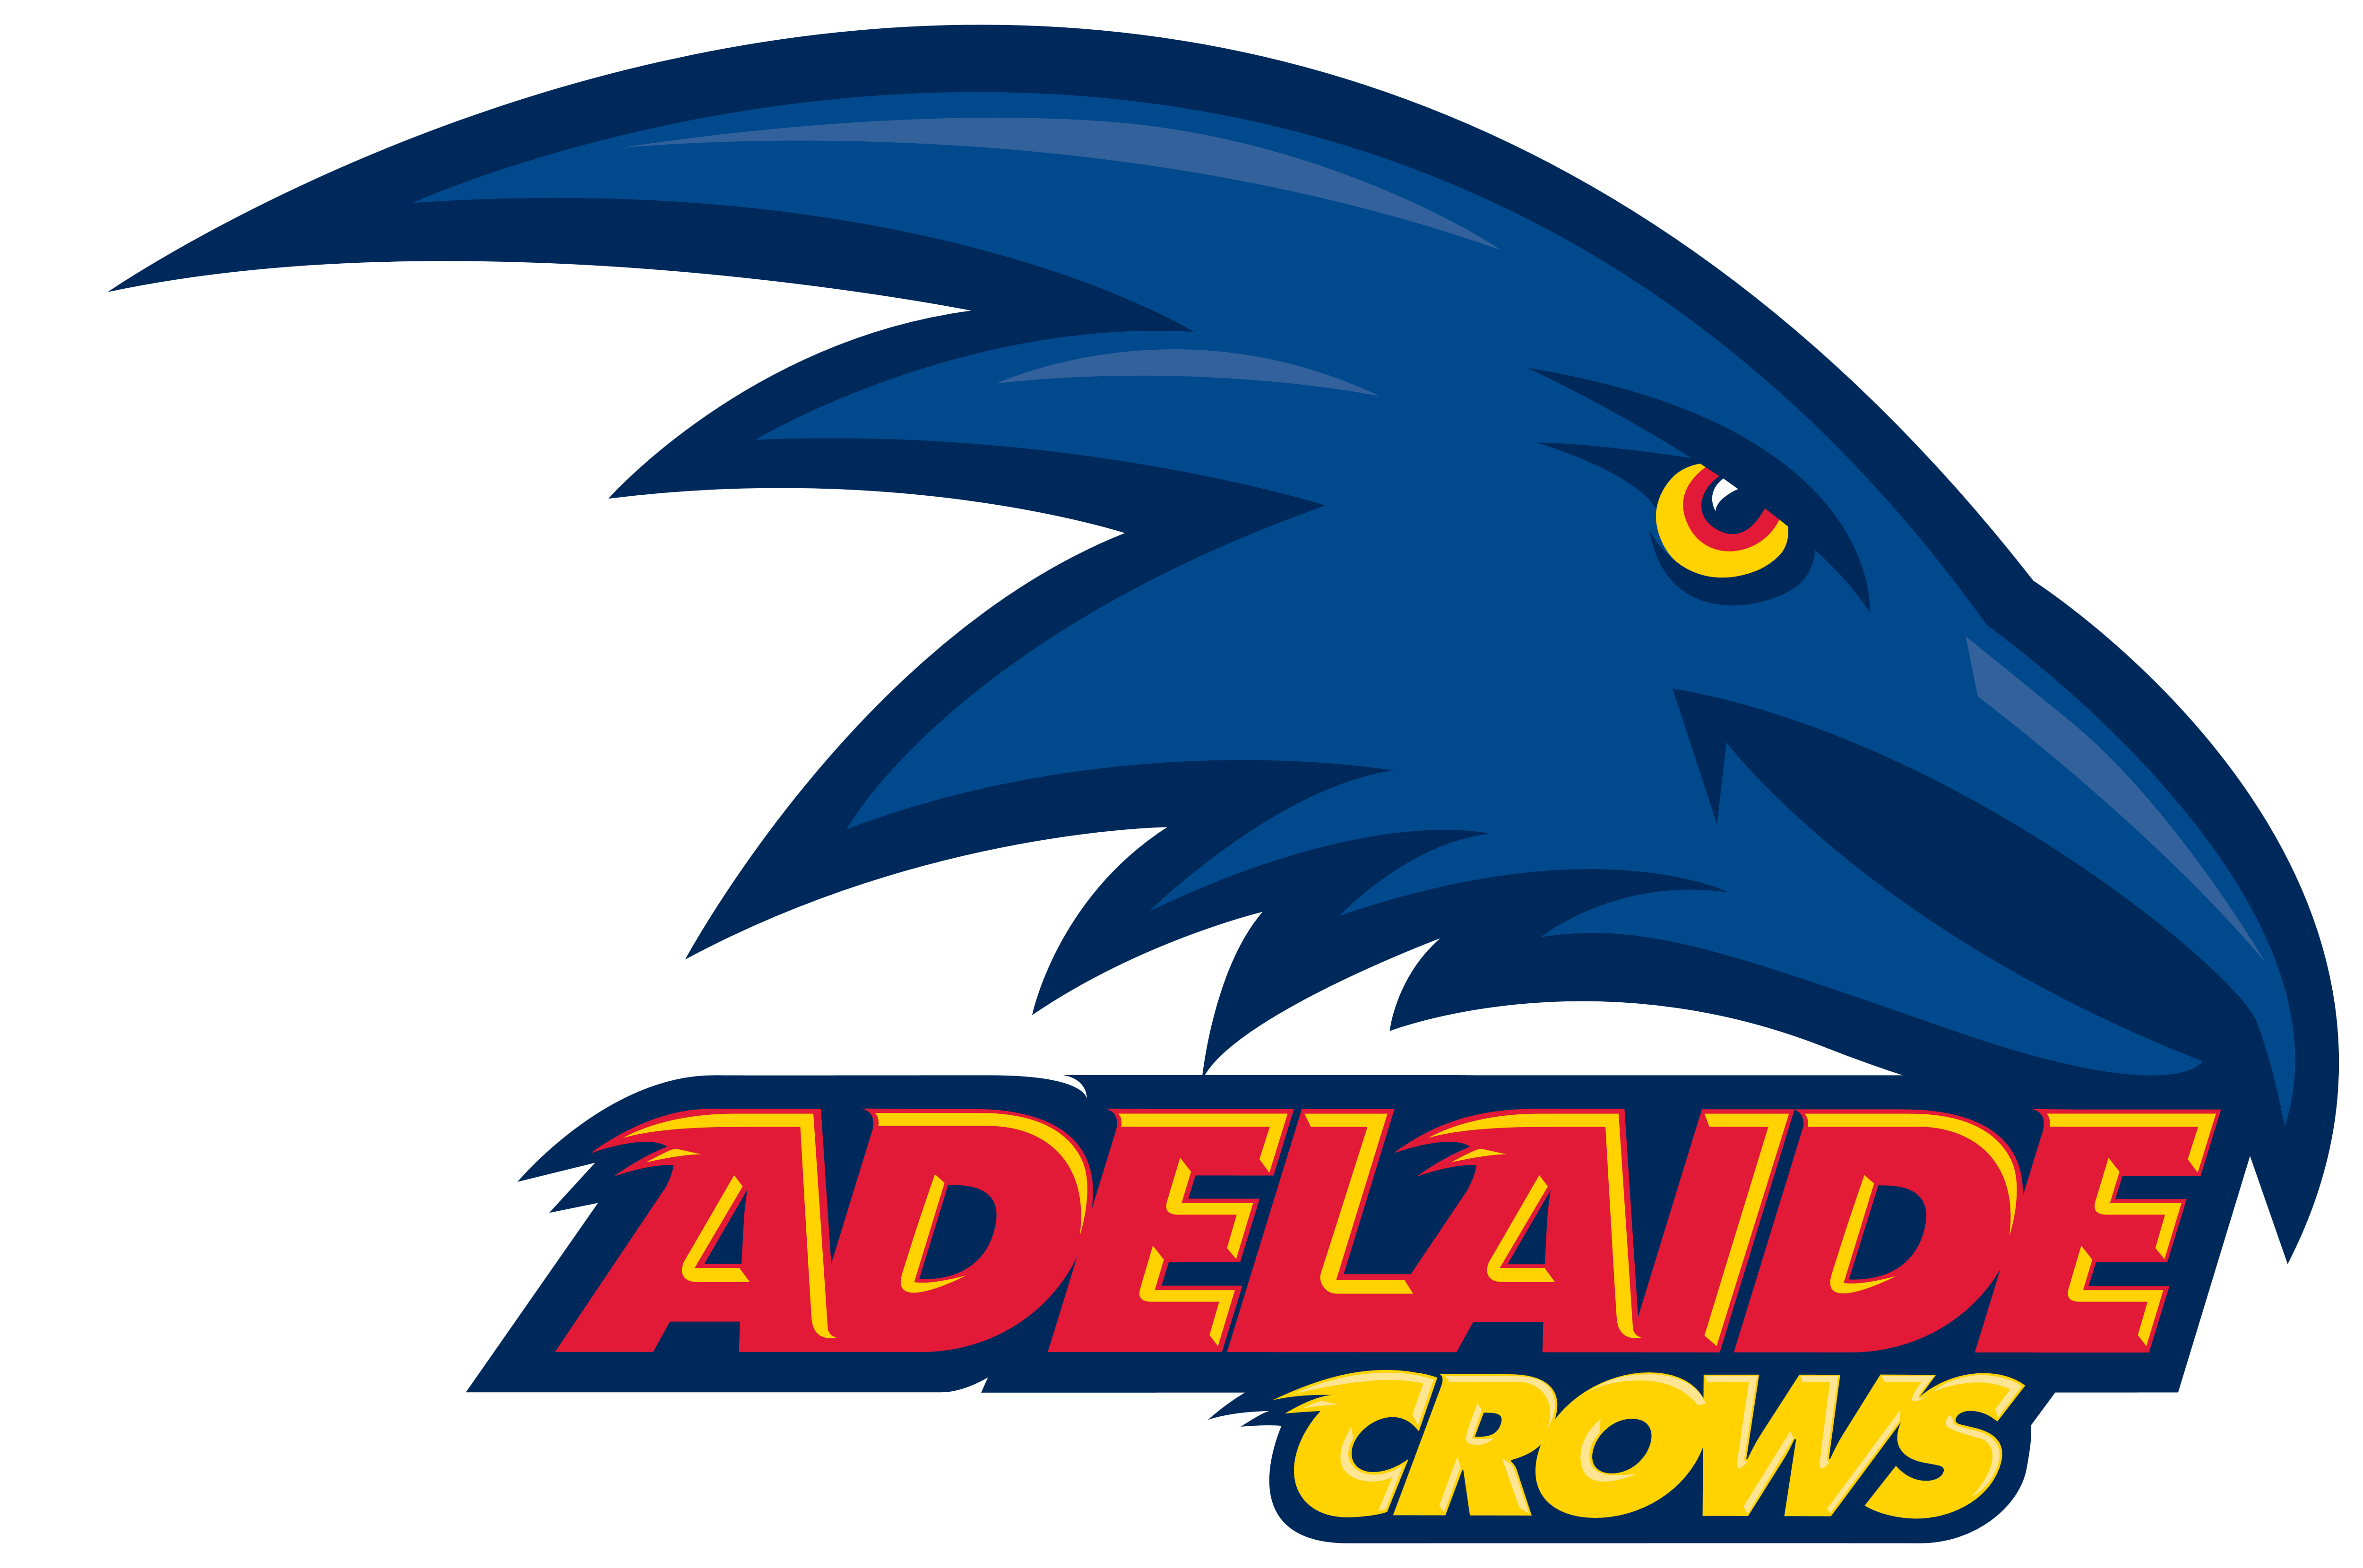 Adelaide Crows Fc Logos Download